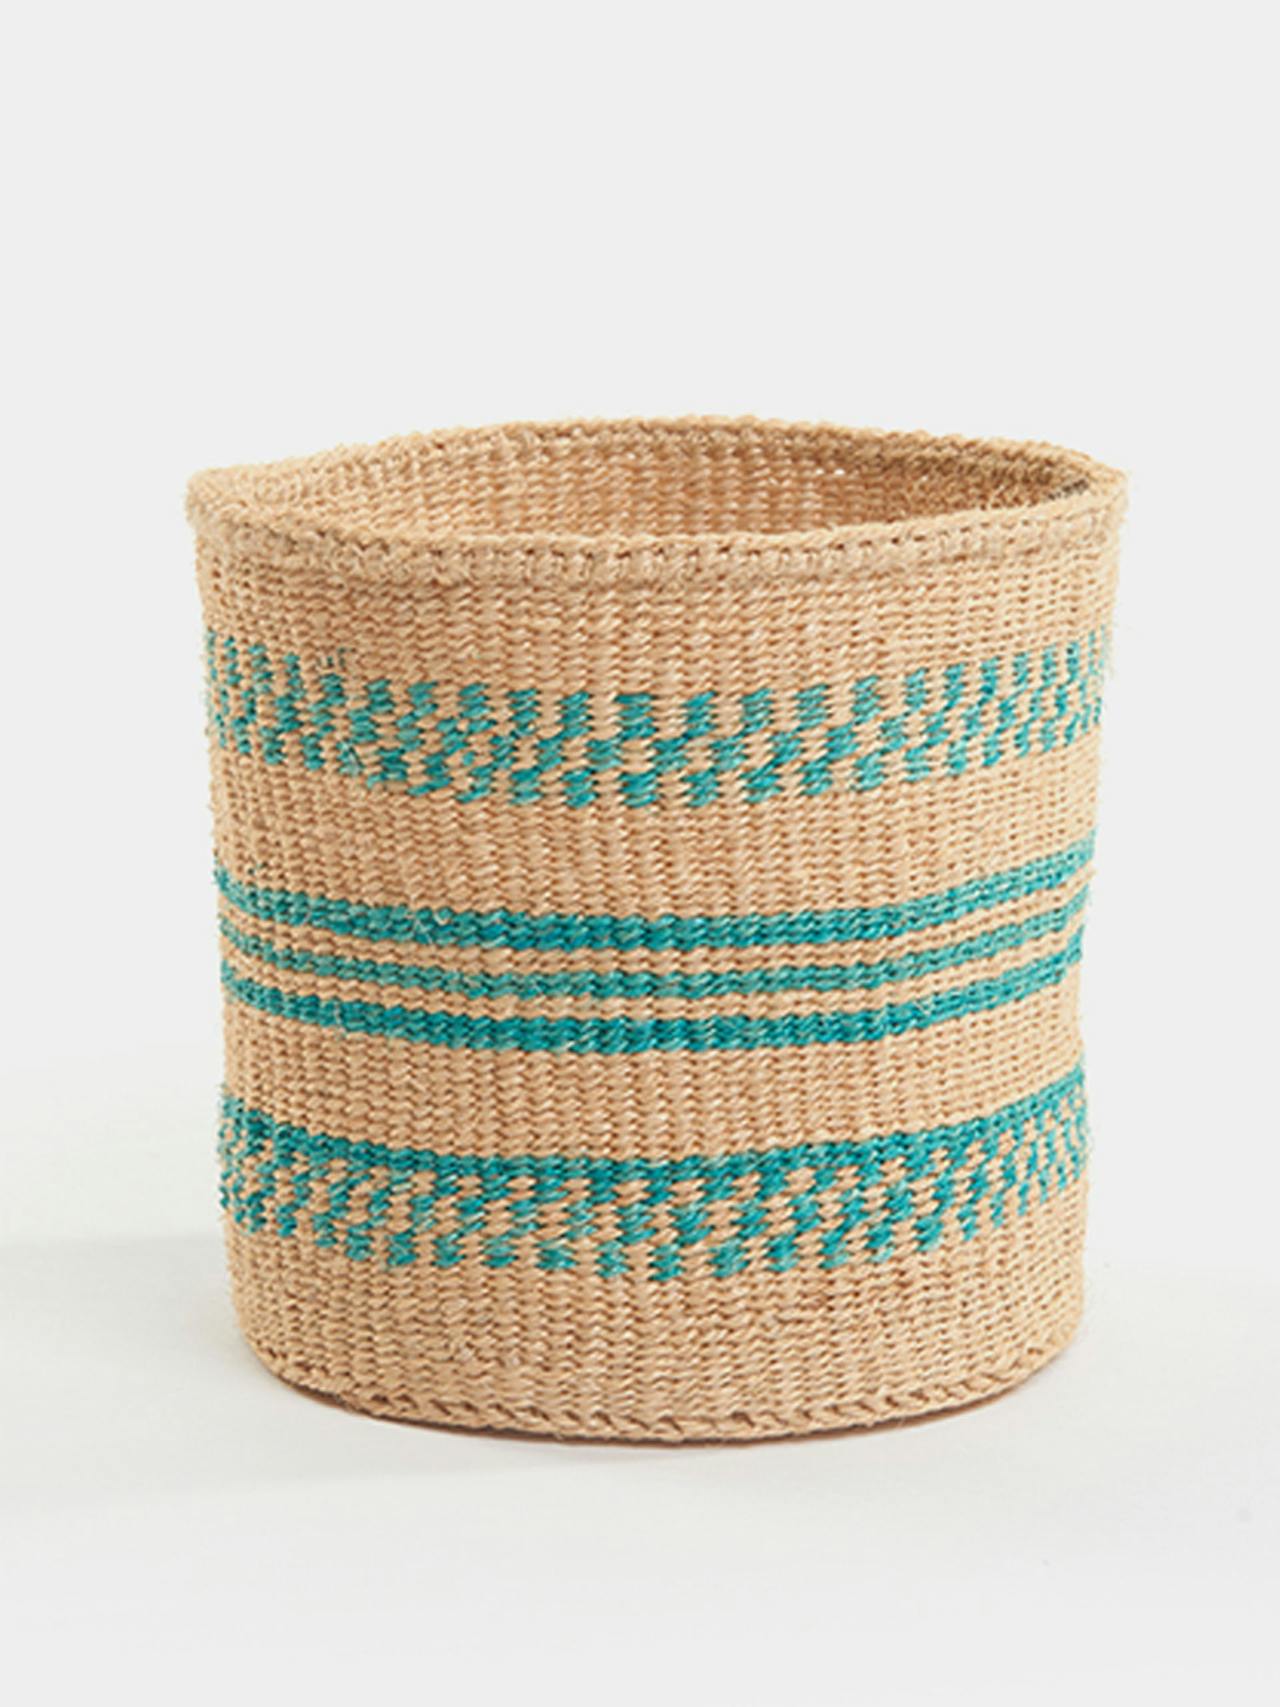 Small practical weave basket, 2